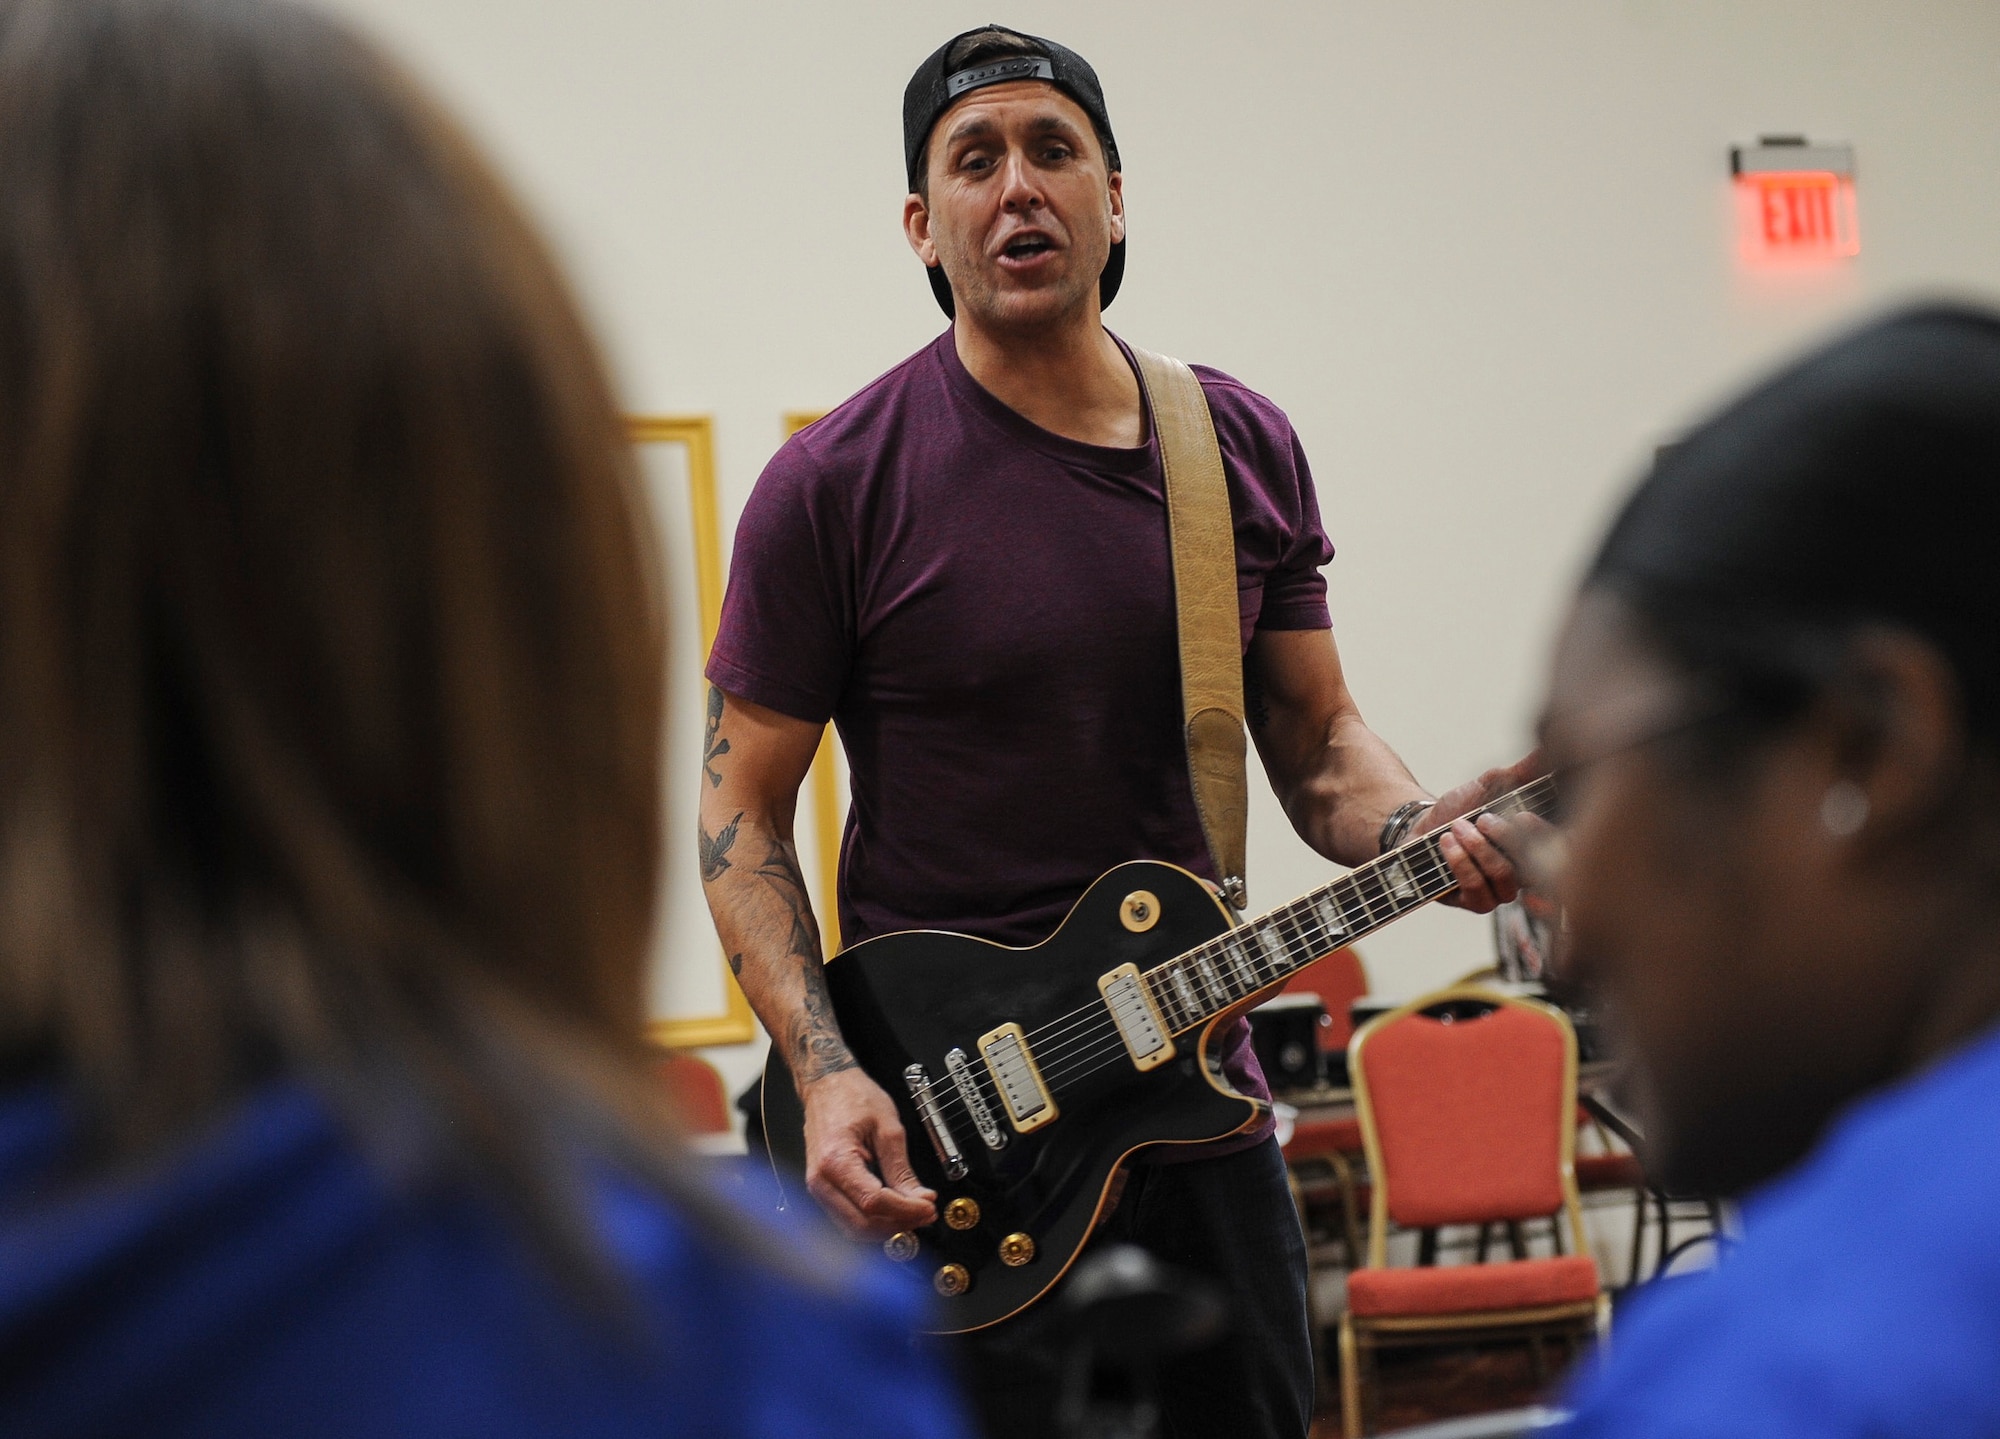 Former Korn guitarist and Rock to Recovery founder Wes Geer shouts pointers to Air Force Wounded Warrior Trials participants while playing the guitar during a Rock to Recovery practice session in Las Vegas, March 1, 2015. Geer played guitar during two interactive music sessions with AFW2 Trial’s band, and helped the group perform their song in front of family and friends during the games’ post-event banquet. (U.S. Air Force photo by Staff Sgt. Siuta B. Ika)